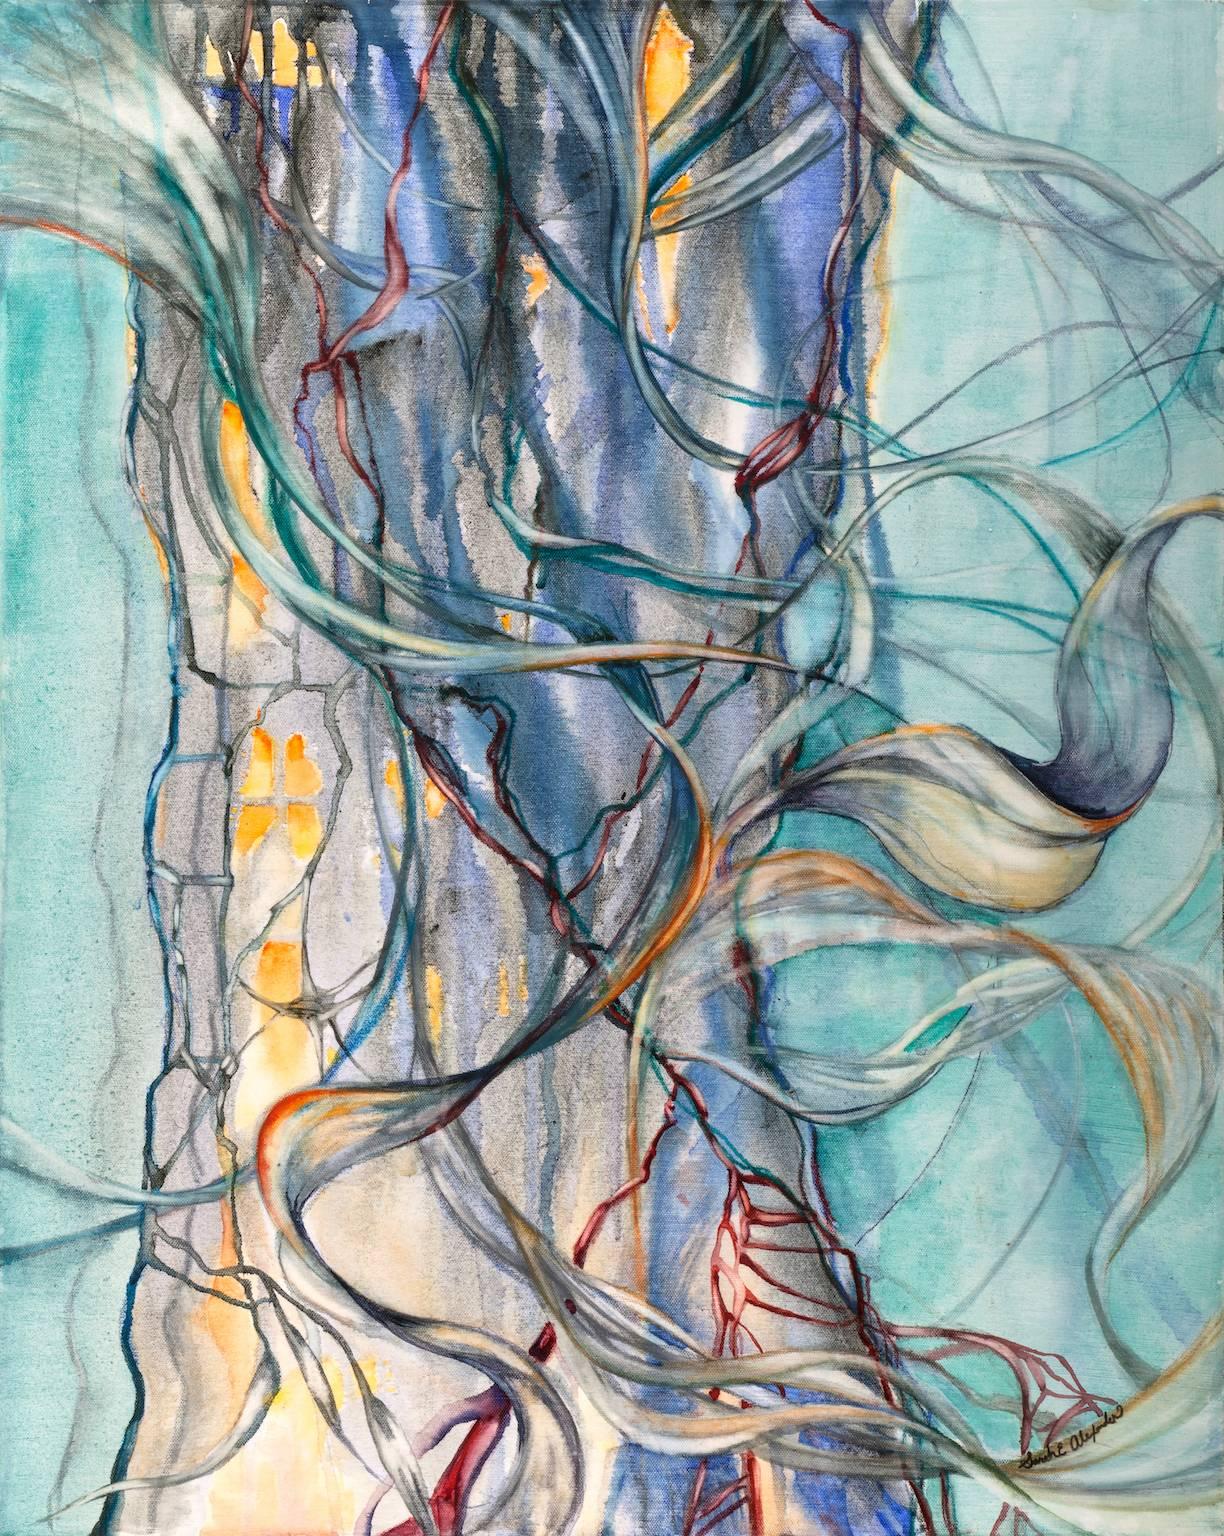 "Ebb and Flow", abstract, surreal, turquoises, blues, watercolor painting